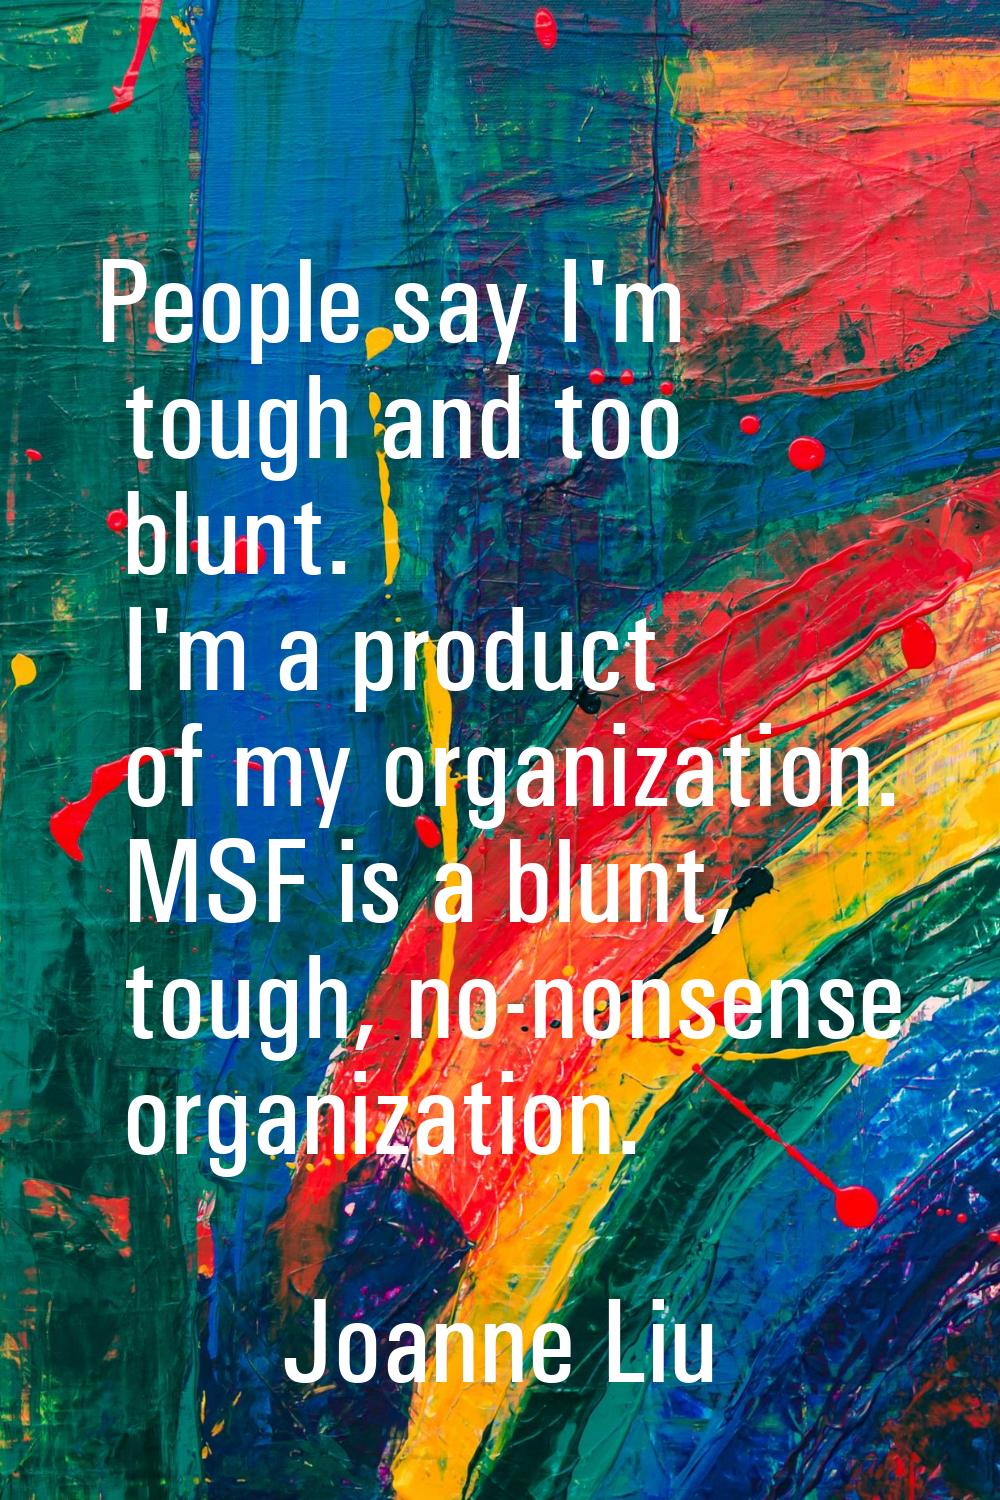 People say I'm tough and too blunt. I'm a product of my organization. MSF is a blunt, tough, no-non